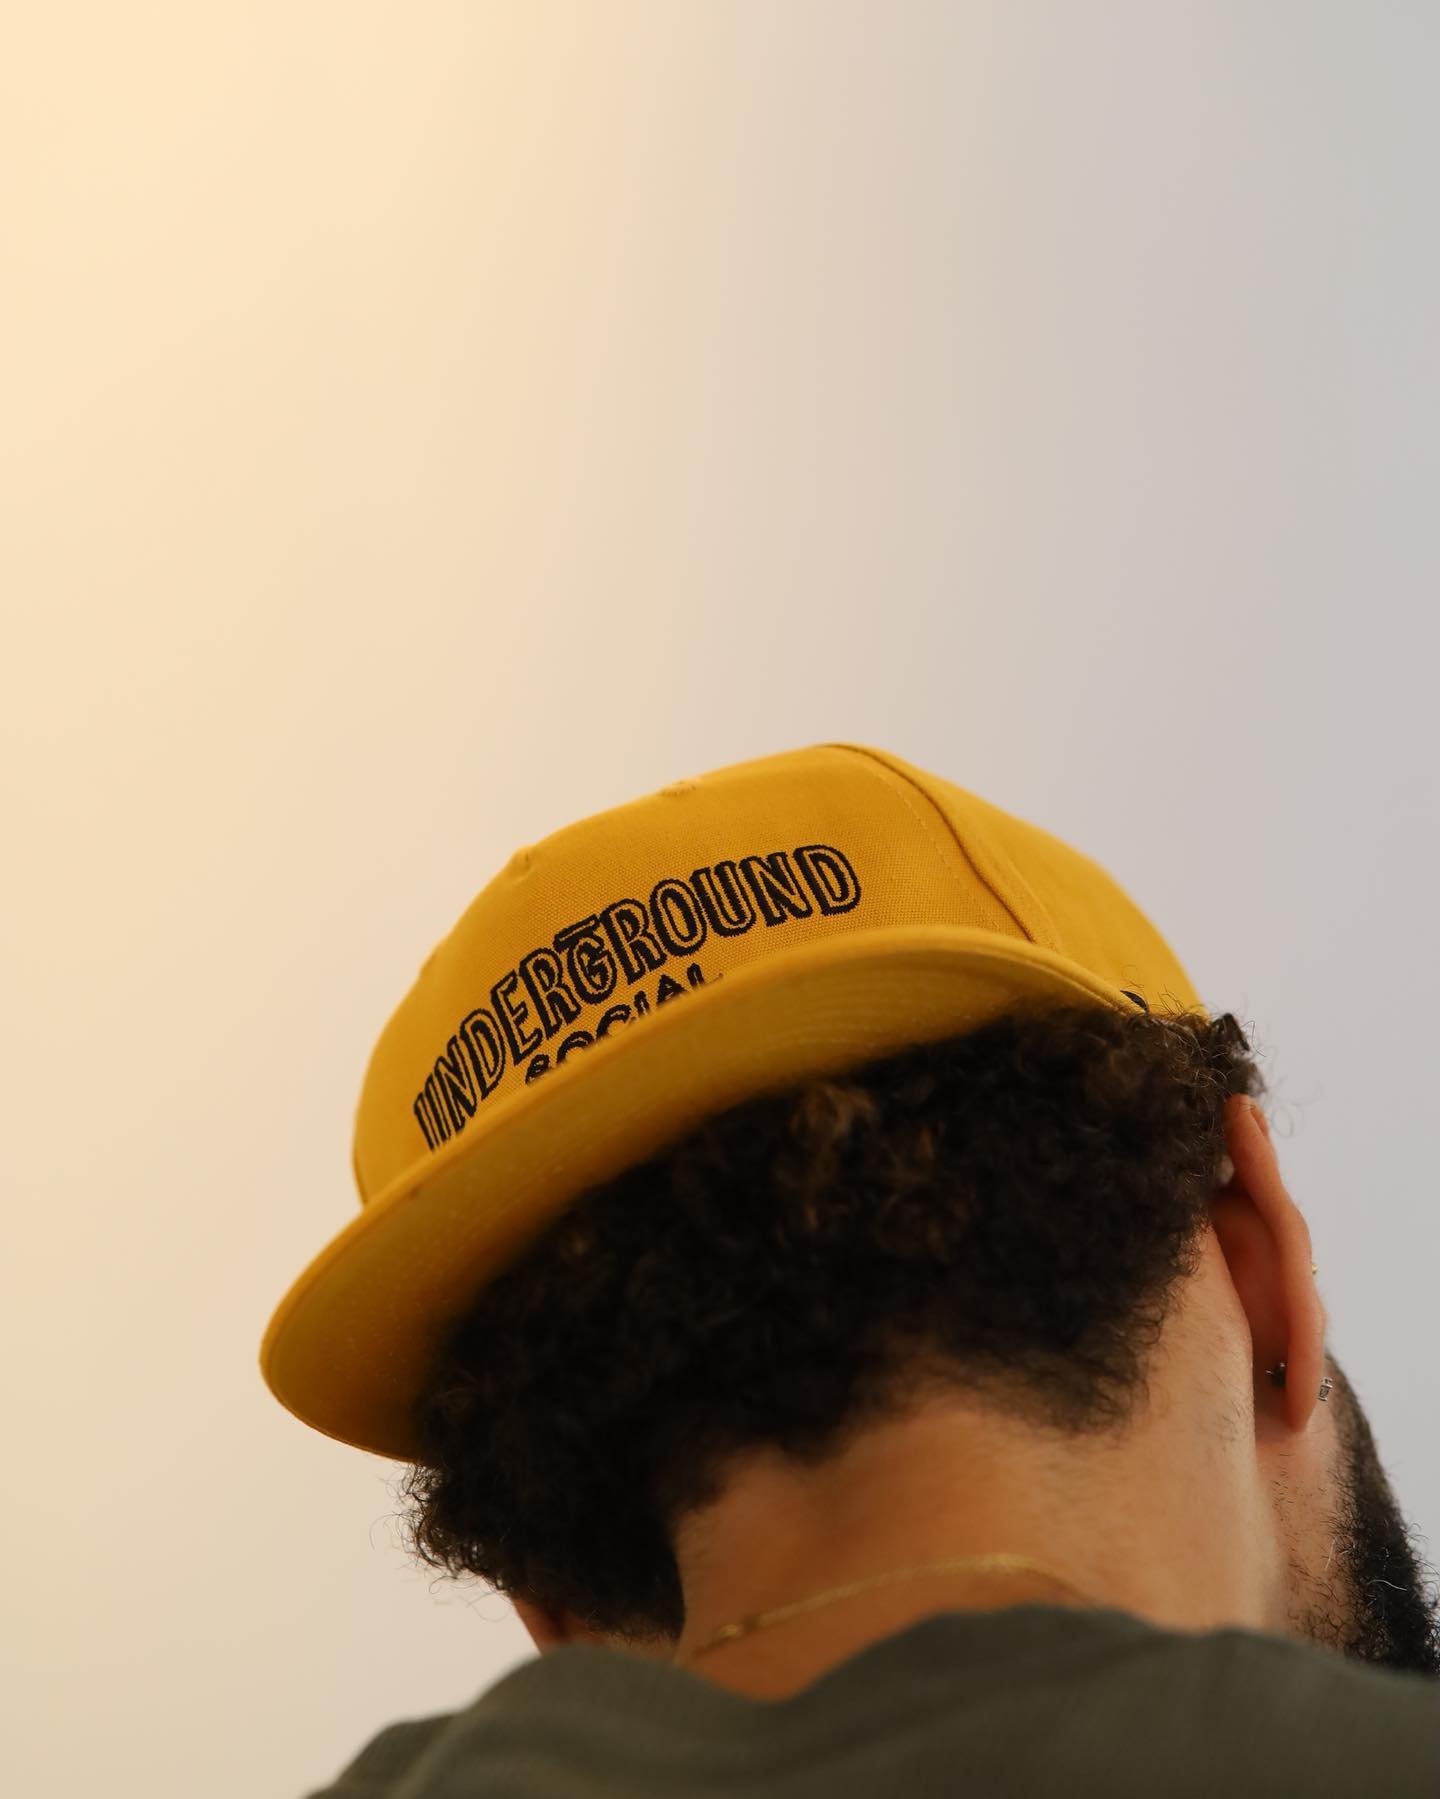 Don&rsquo;t feel like fixing your hair some days? Our slick new hats can help on those days 👌🏻 $35 - we offer the cap in two colors (mustard &amp; tarpon) 

#cap #hat #undergroundsocial #mississippi #mississippihairstylist #mississippibarber #barbe